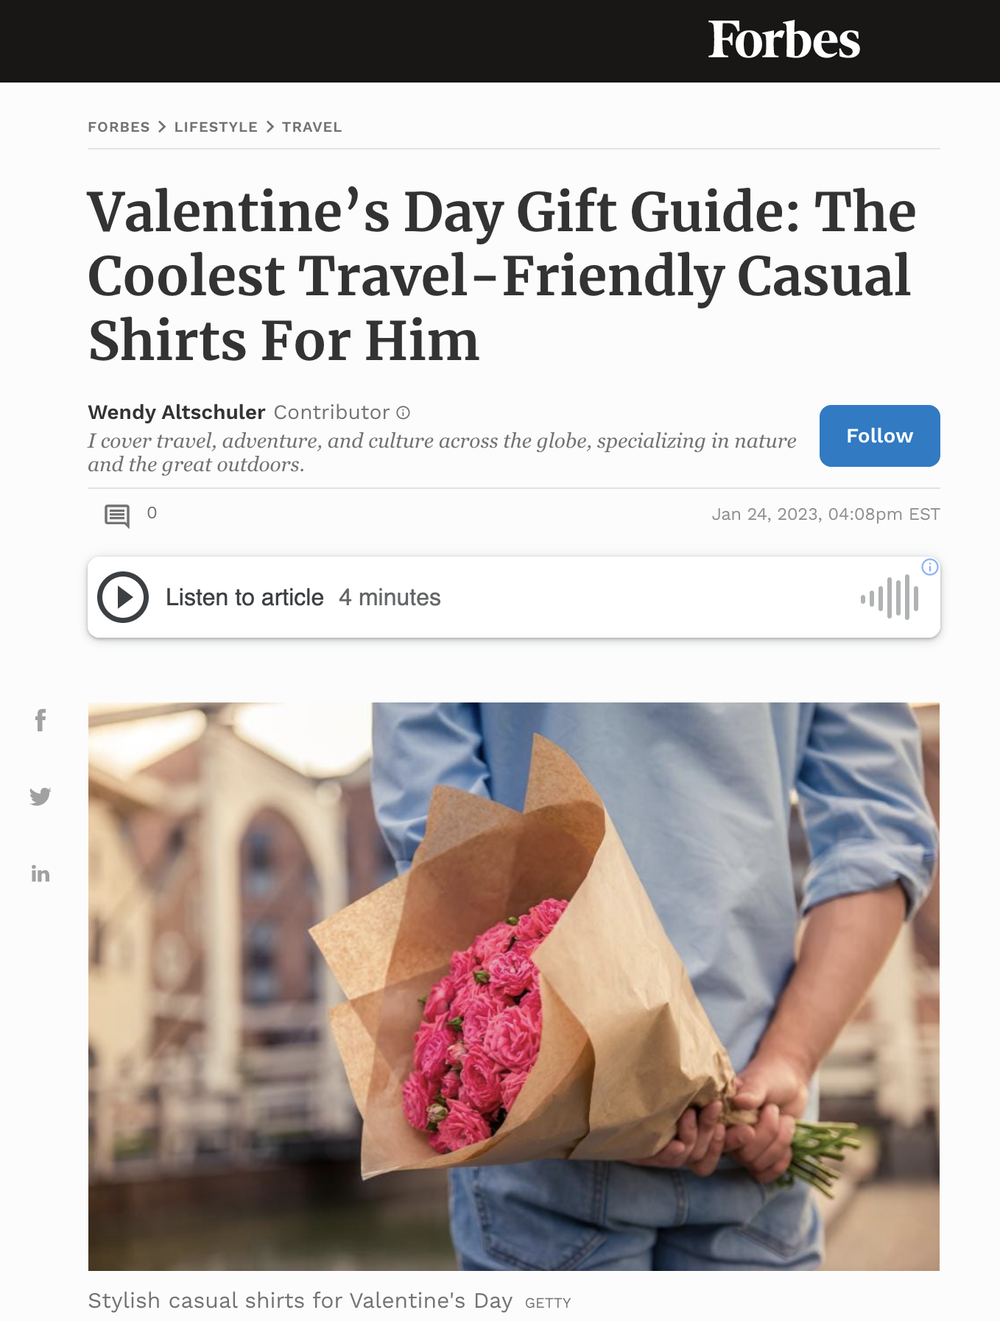 Valentine’s Day Gift Guide: The Coolest Travel-Friendly Casual Shirts For Him